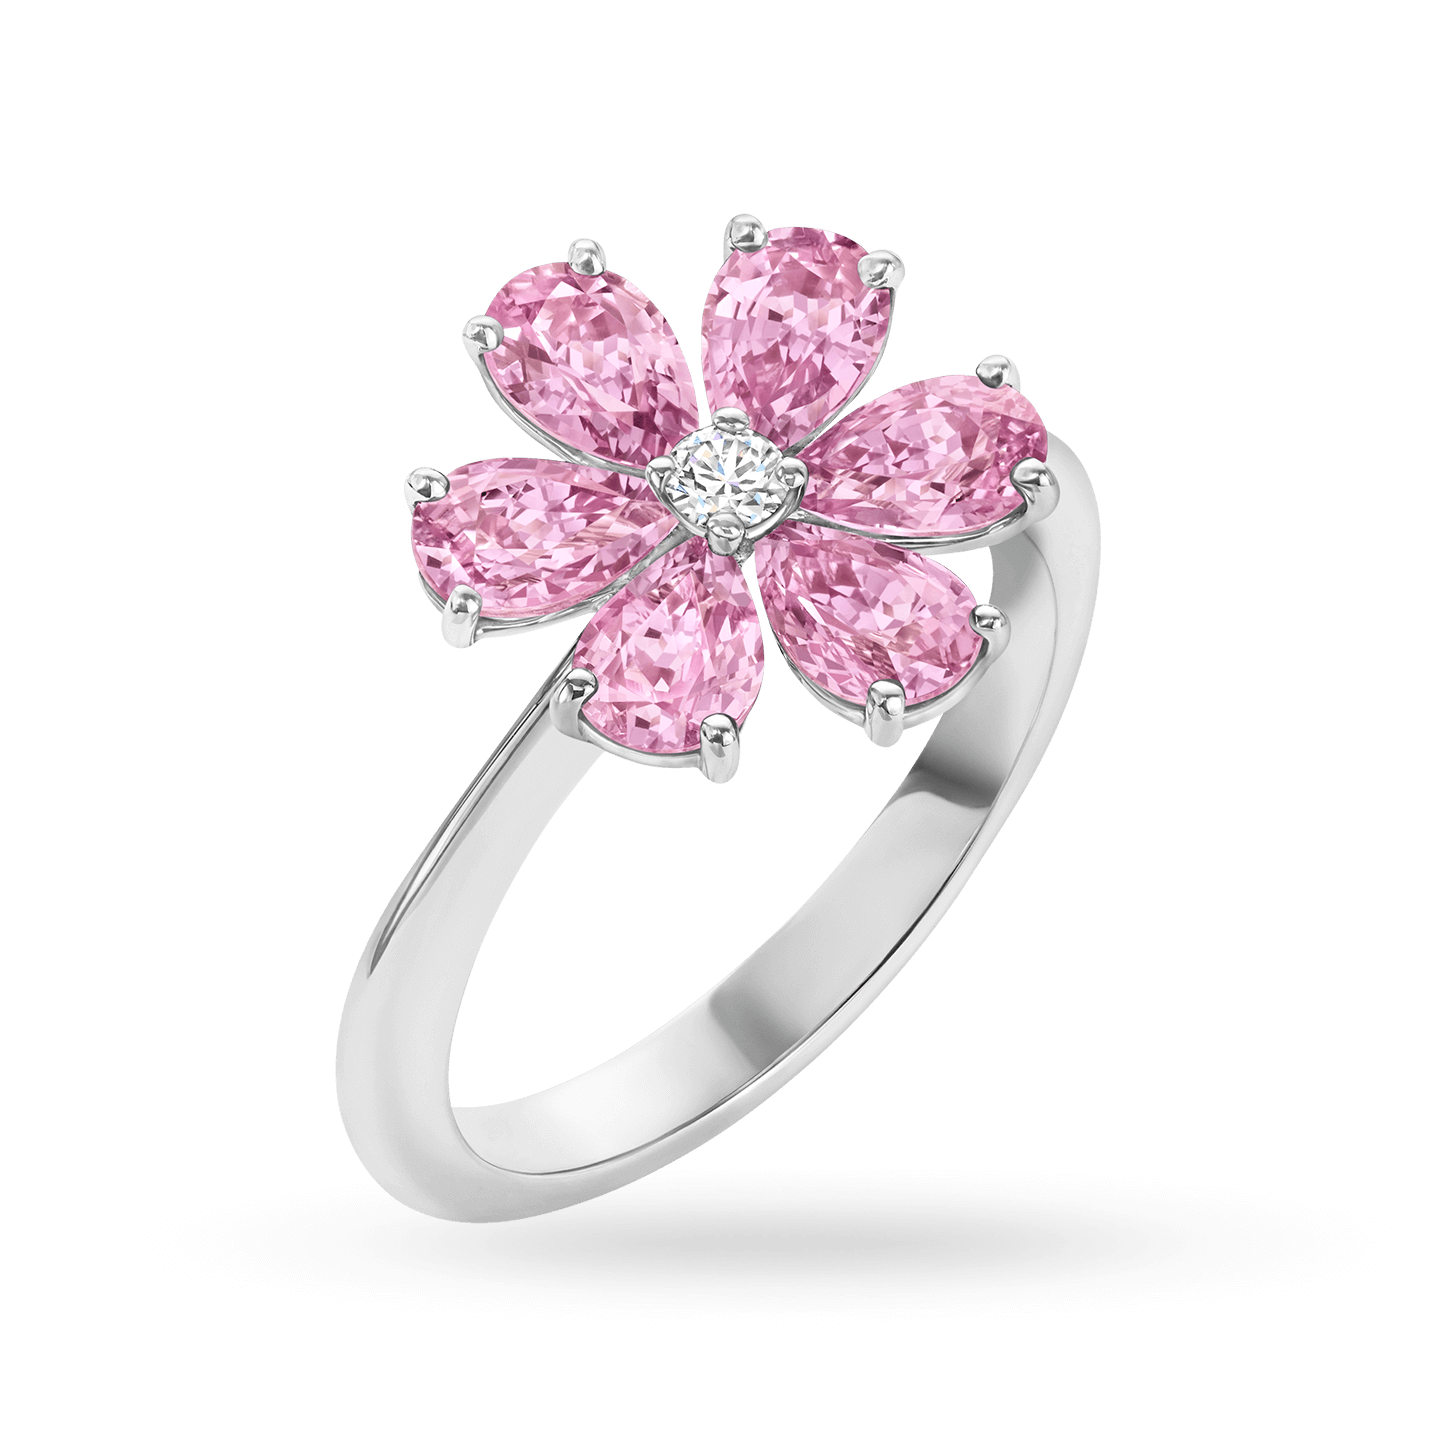 Forget-Me-Not Pink Sapphire and Diamond Ring, Product Image 2